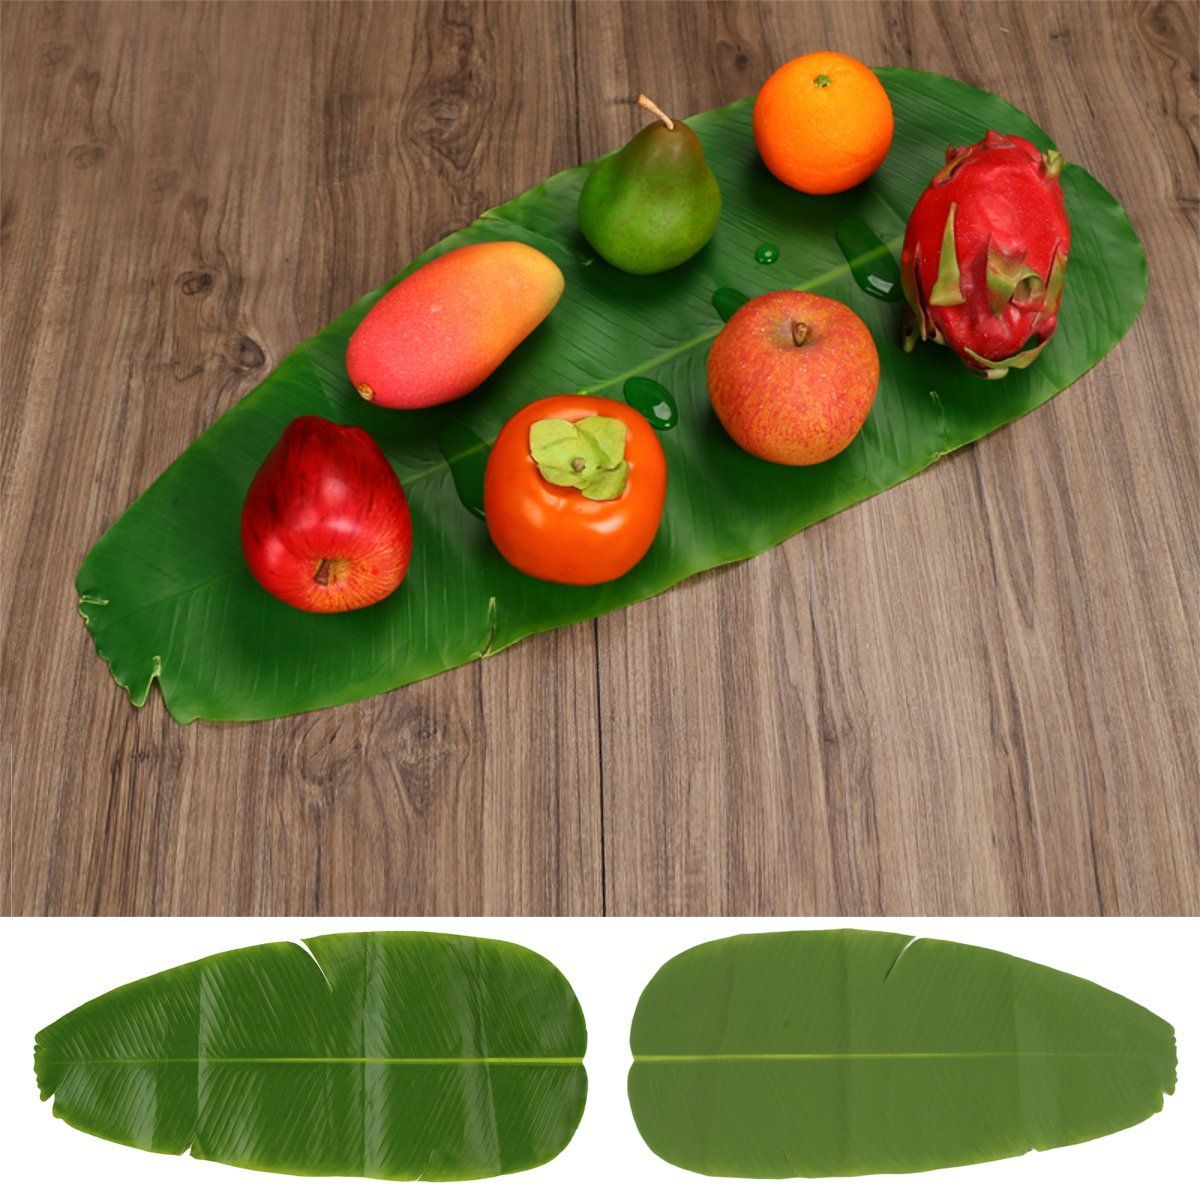 Large-Artificial-Plant-Banana-Leaf-Tropical-Simulation-Leaves-Wedding-Party-Home-Decorations-1545391